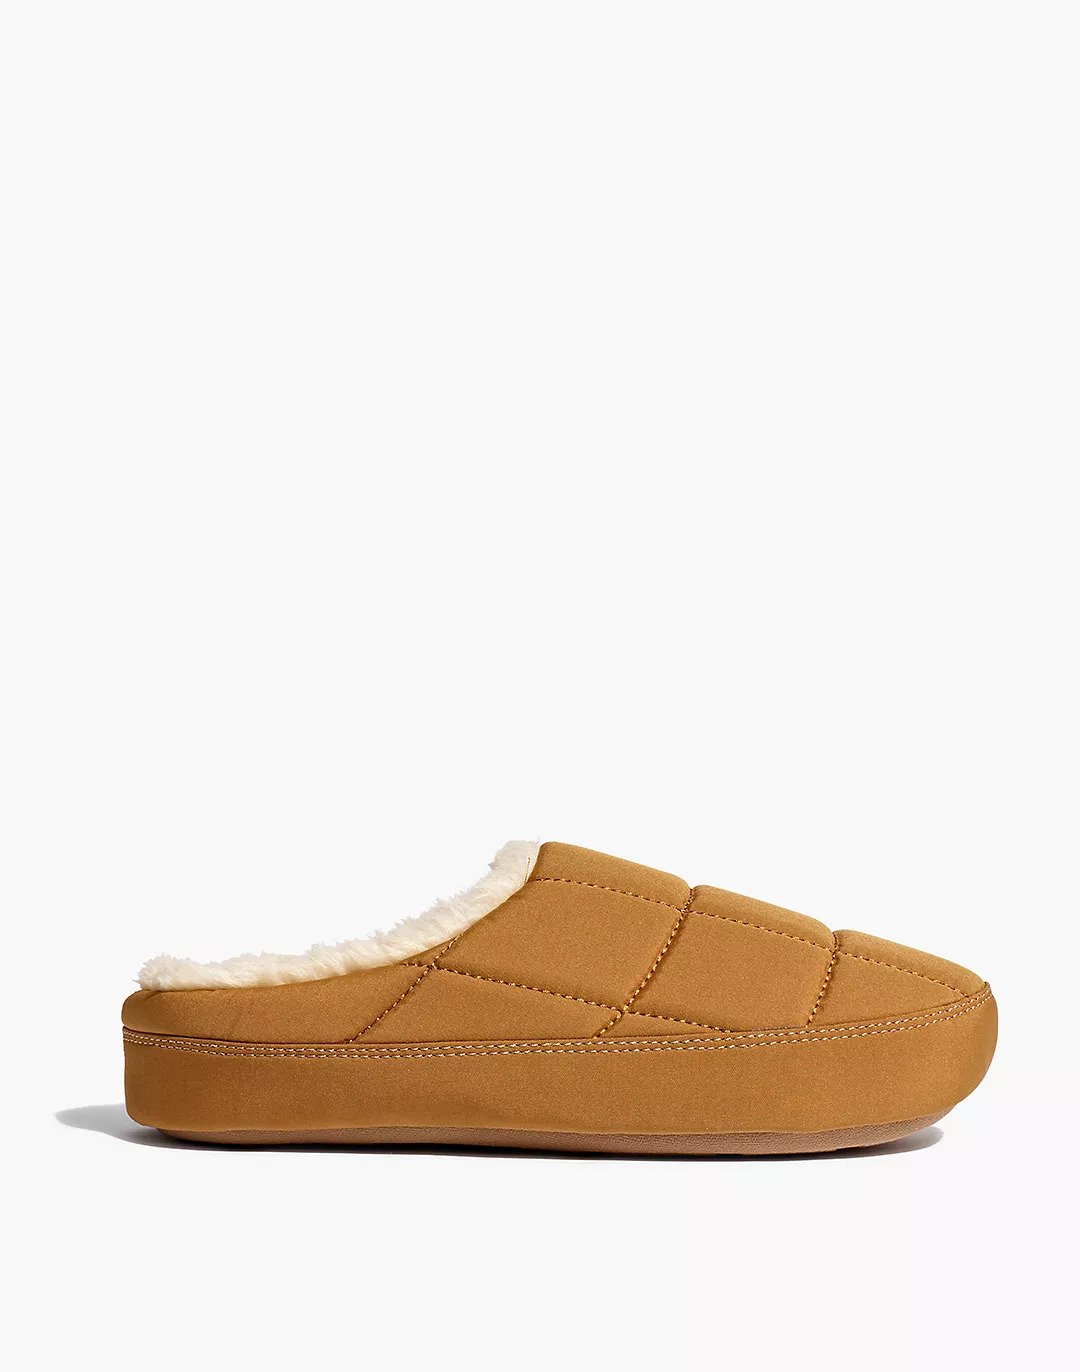 madewell the quilted jacqueline slipper